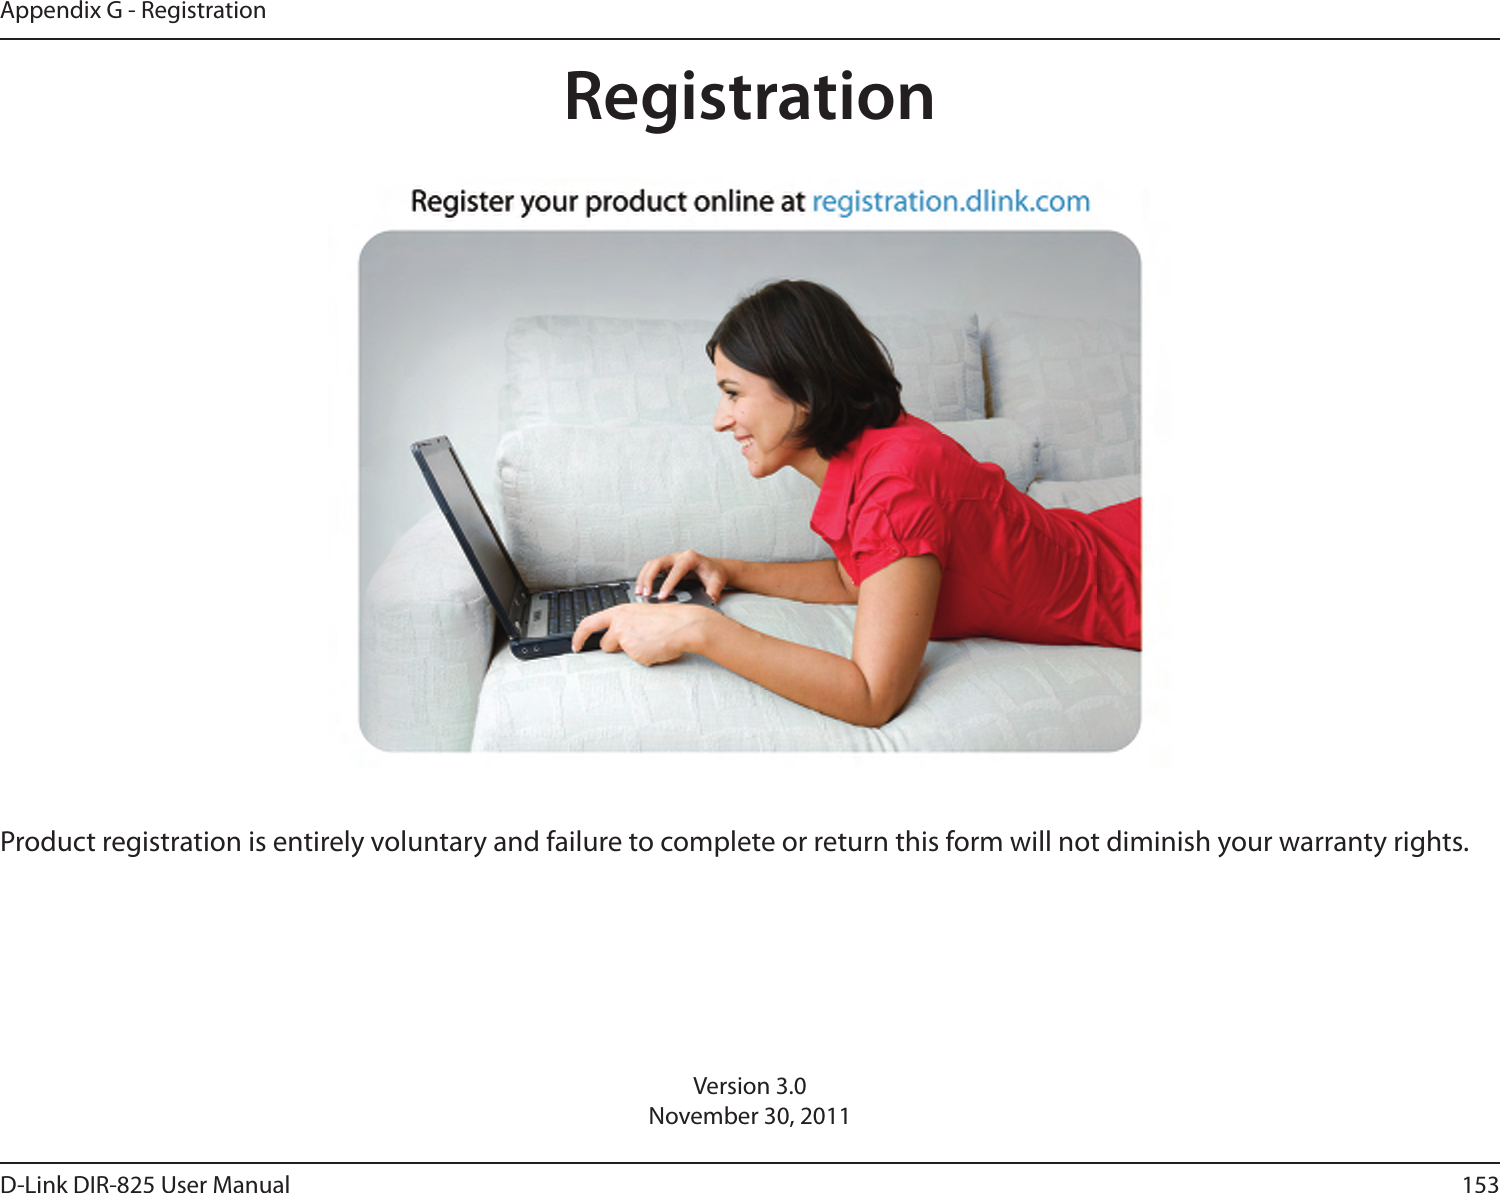 153D-Link DIR-825 User ManualAppendix G - RegistrationVersion 3.0November 30, 2011Product registration is entirely voluntary and failure to complete or return this form will not diminish your warranty rights.Registration